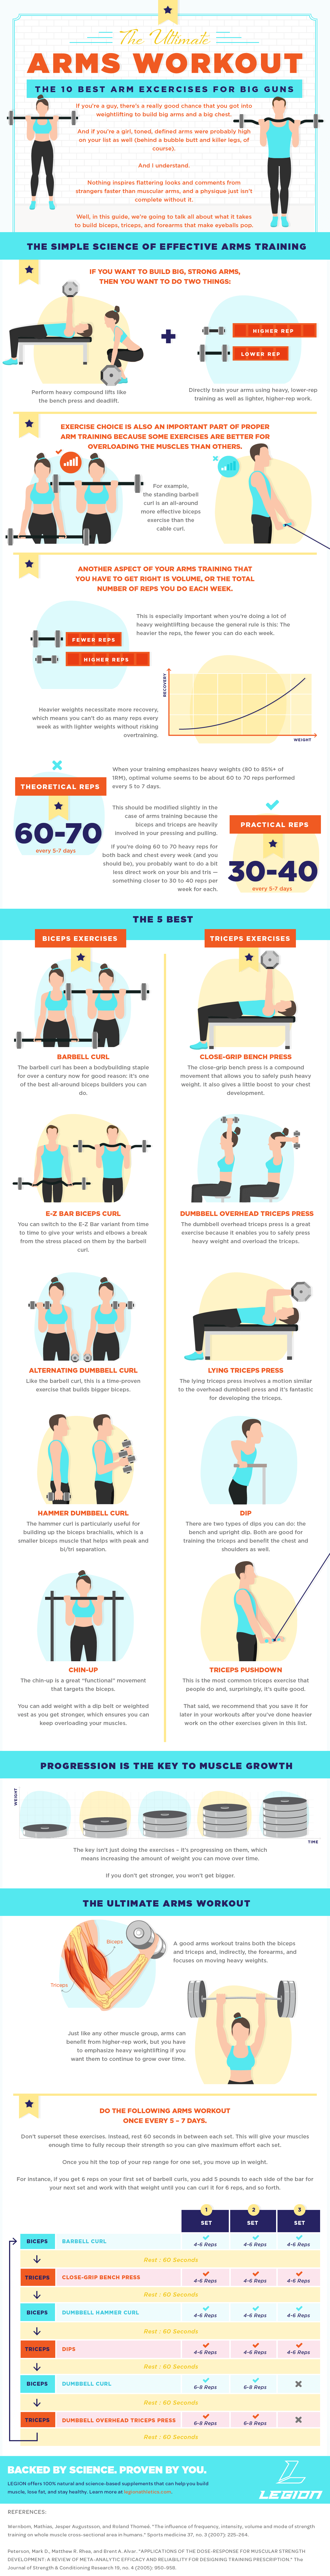 [INFOGRAPHIC] The Ultimate Arms Workout: The 10 Best Arm Exercises